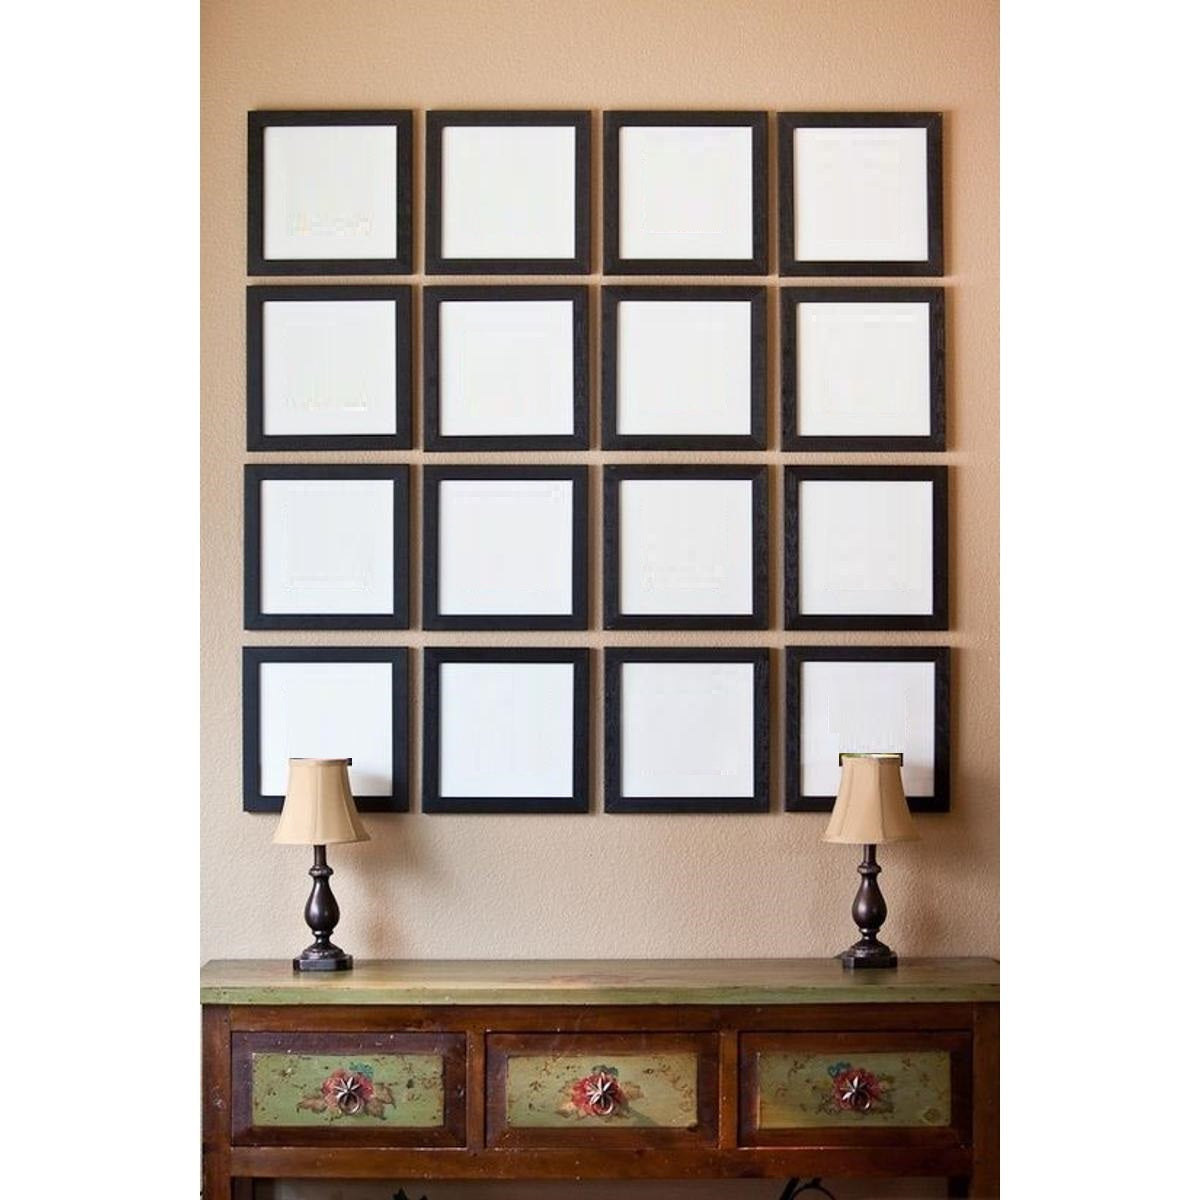 Set of 16 Wall Collage Picture Frames